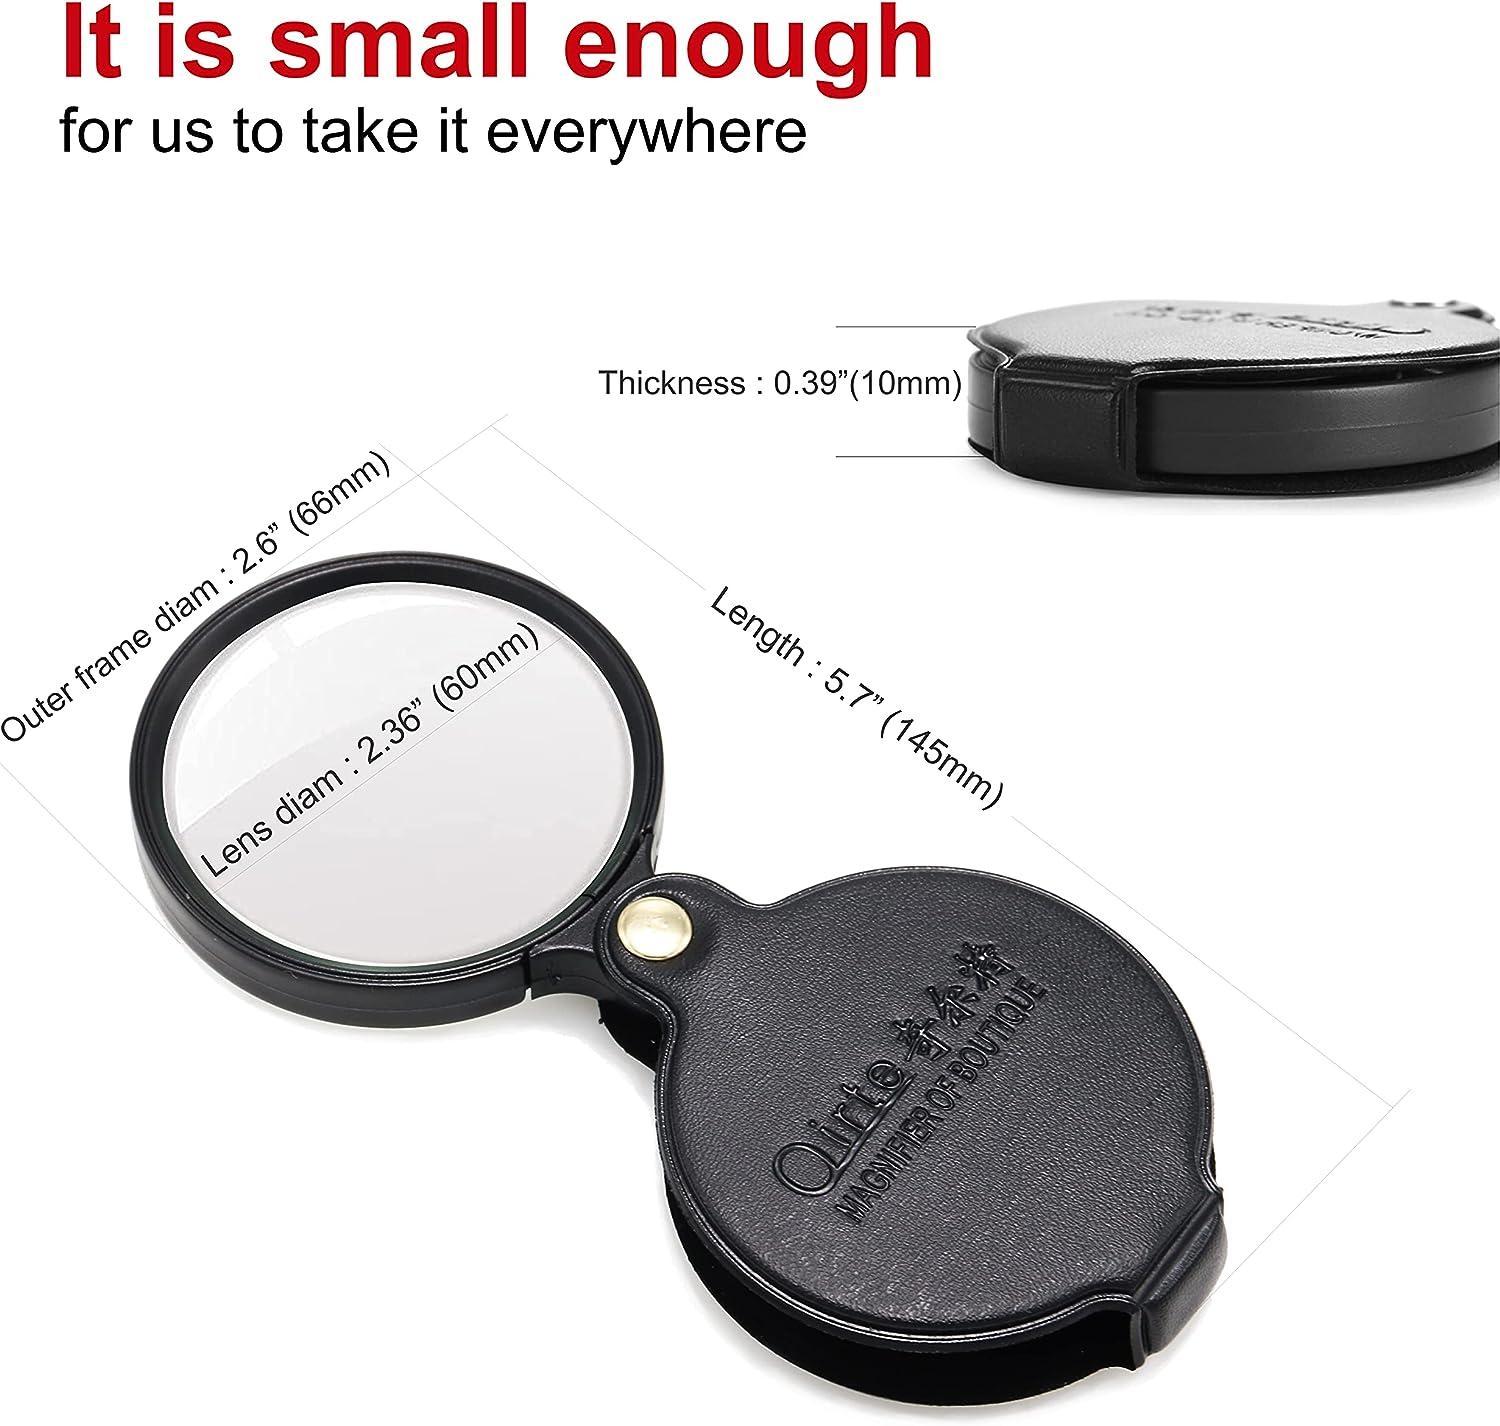 Mini Folding Pocket Magnifier with 10x Loupe 60mm Diameter Magnifying Lens for Reading Newspaper,Book,Magazine,Science Class,Hobby,Jewely,Inspection